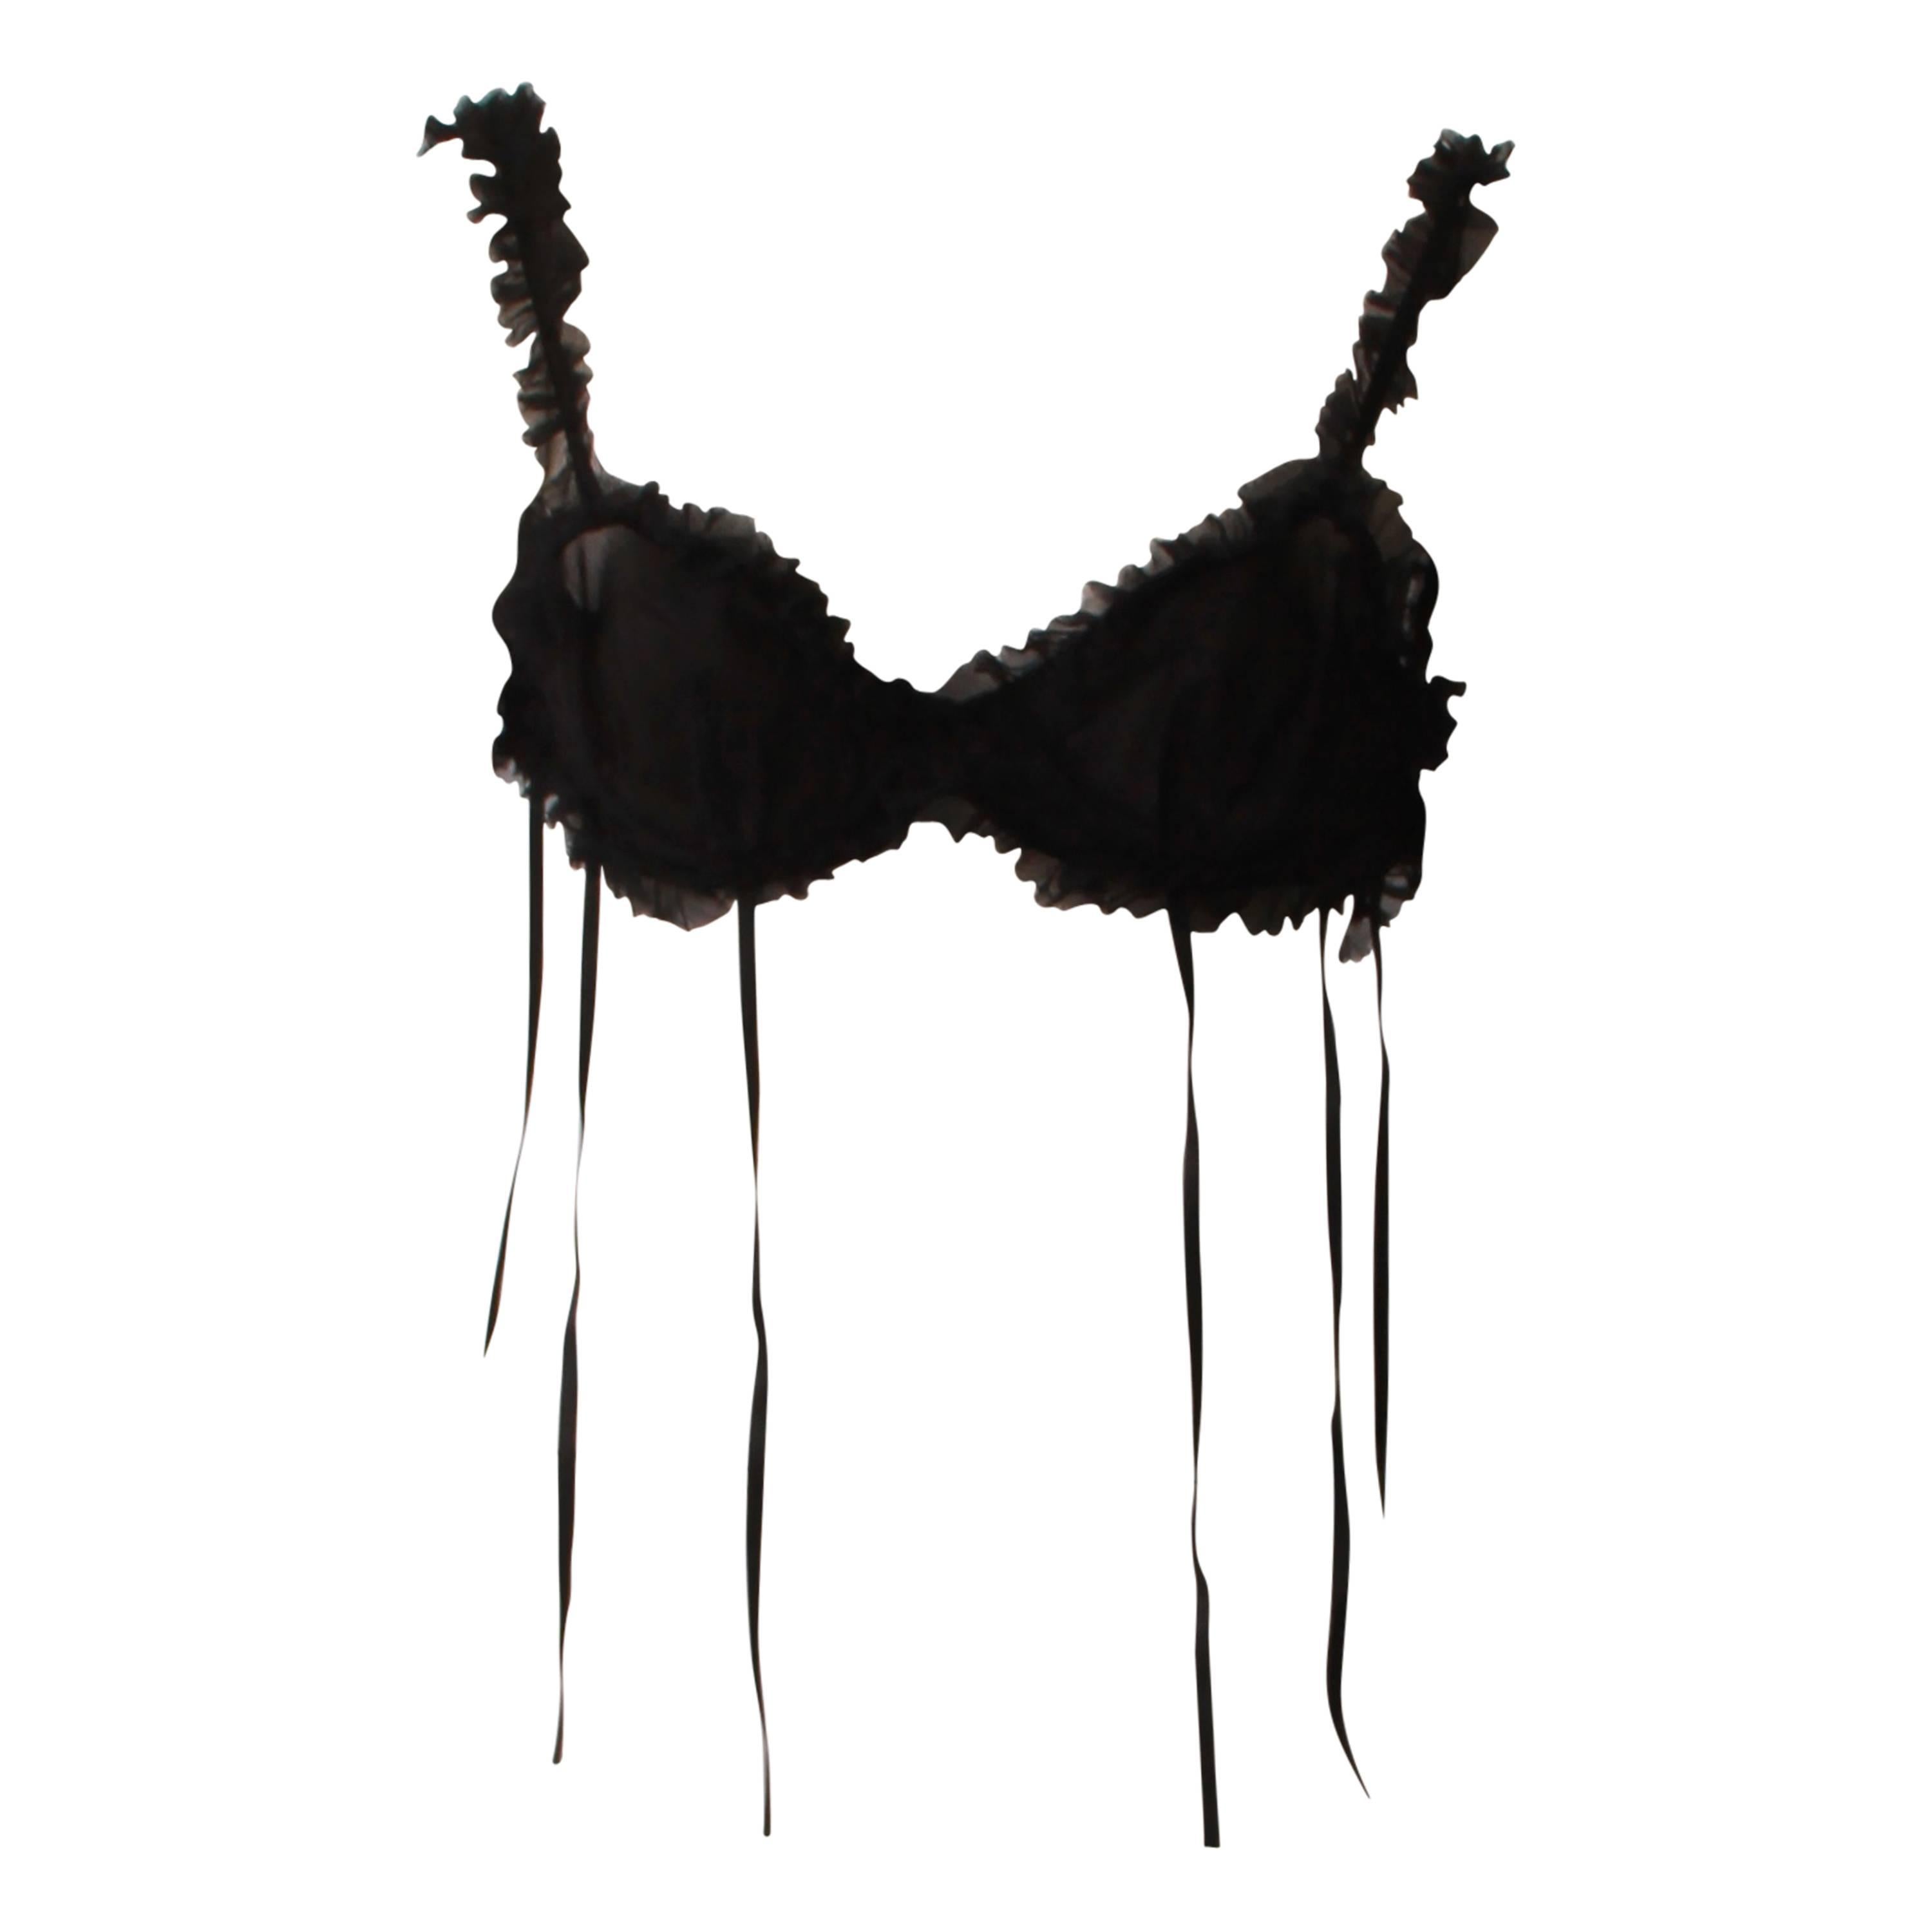 Tom Ford For Gucci Net Silk Ribbon Bra Top Late 1990's For Sale